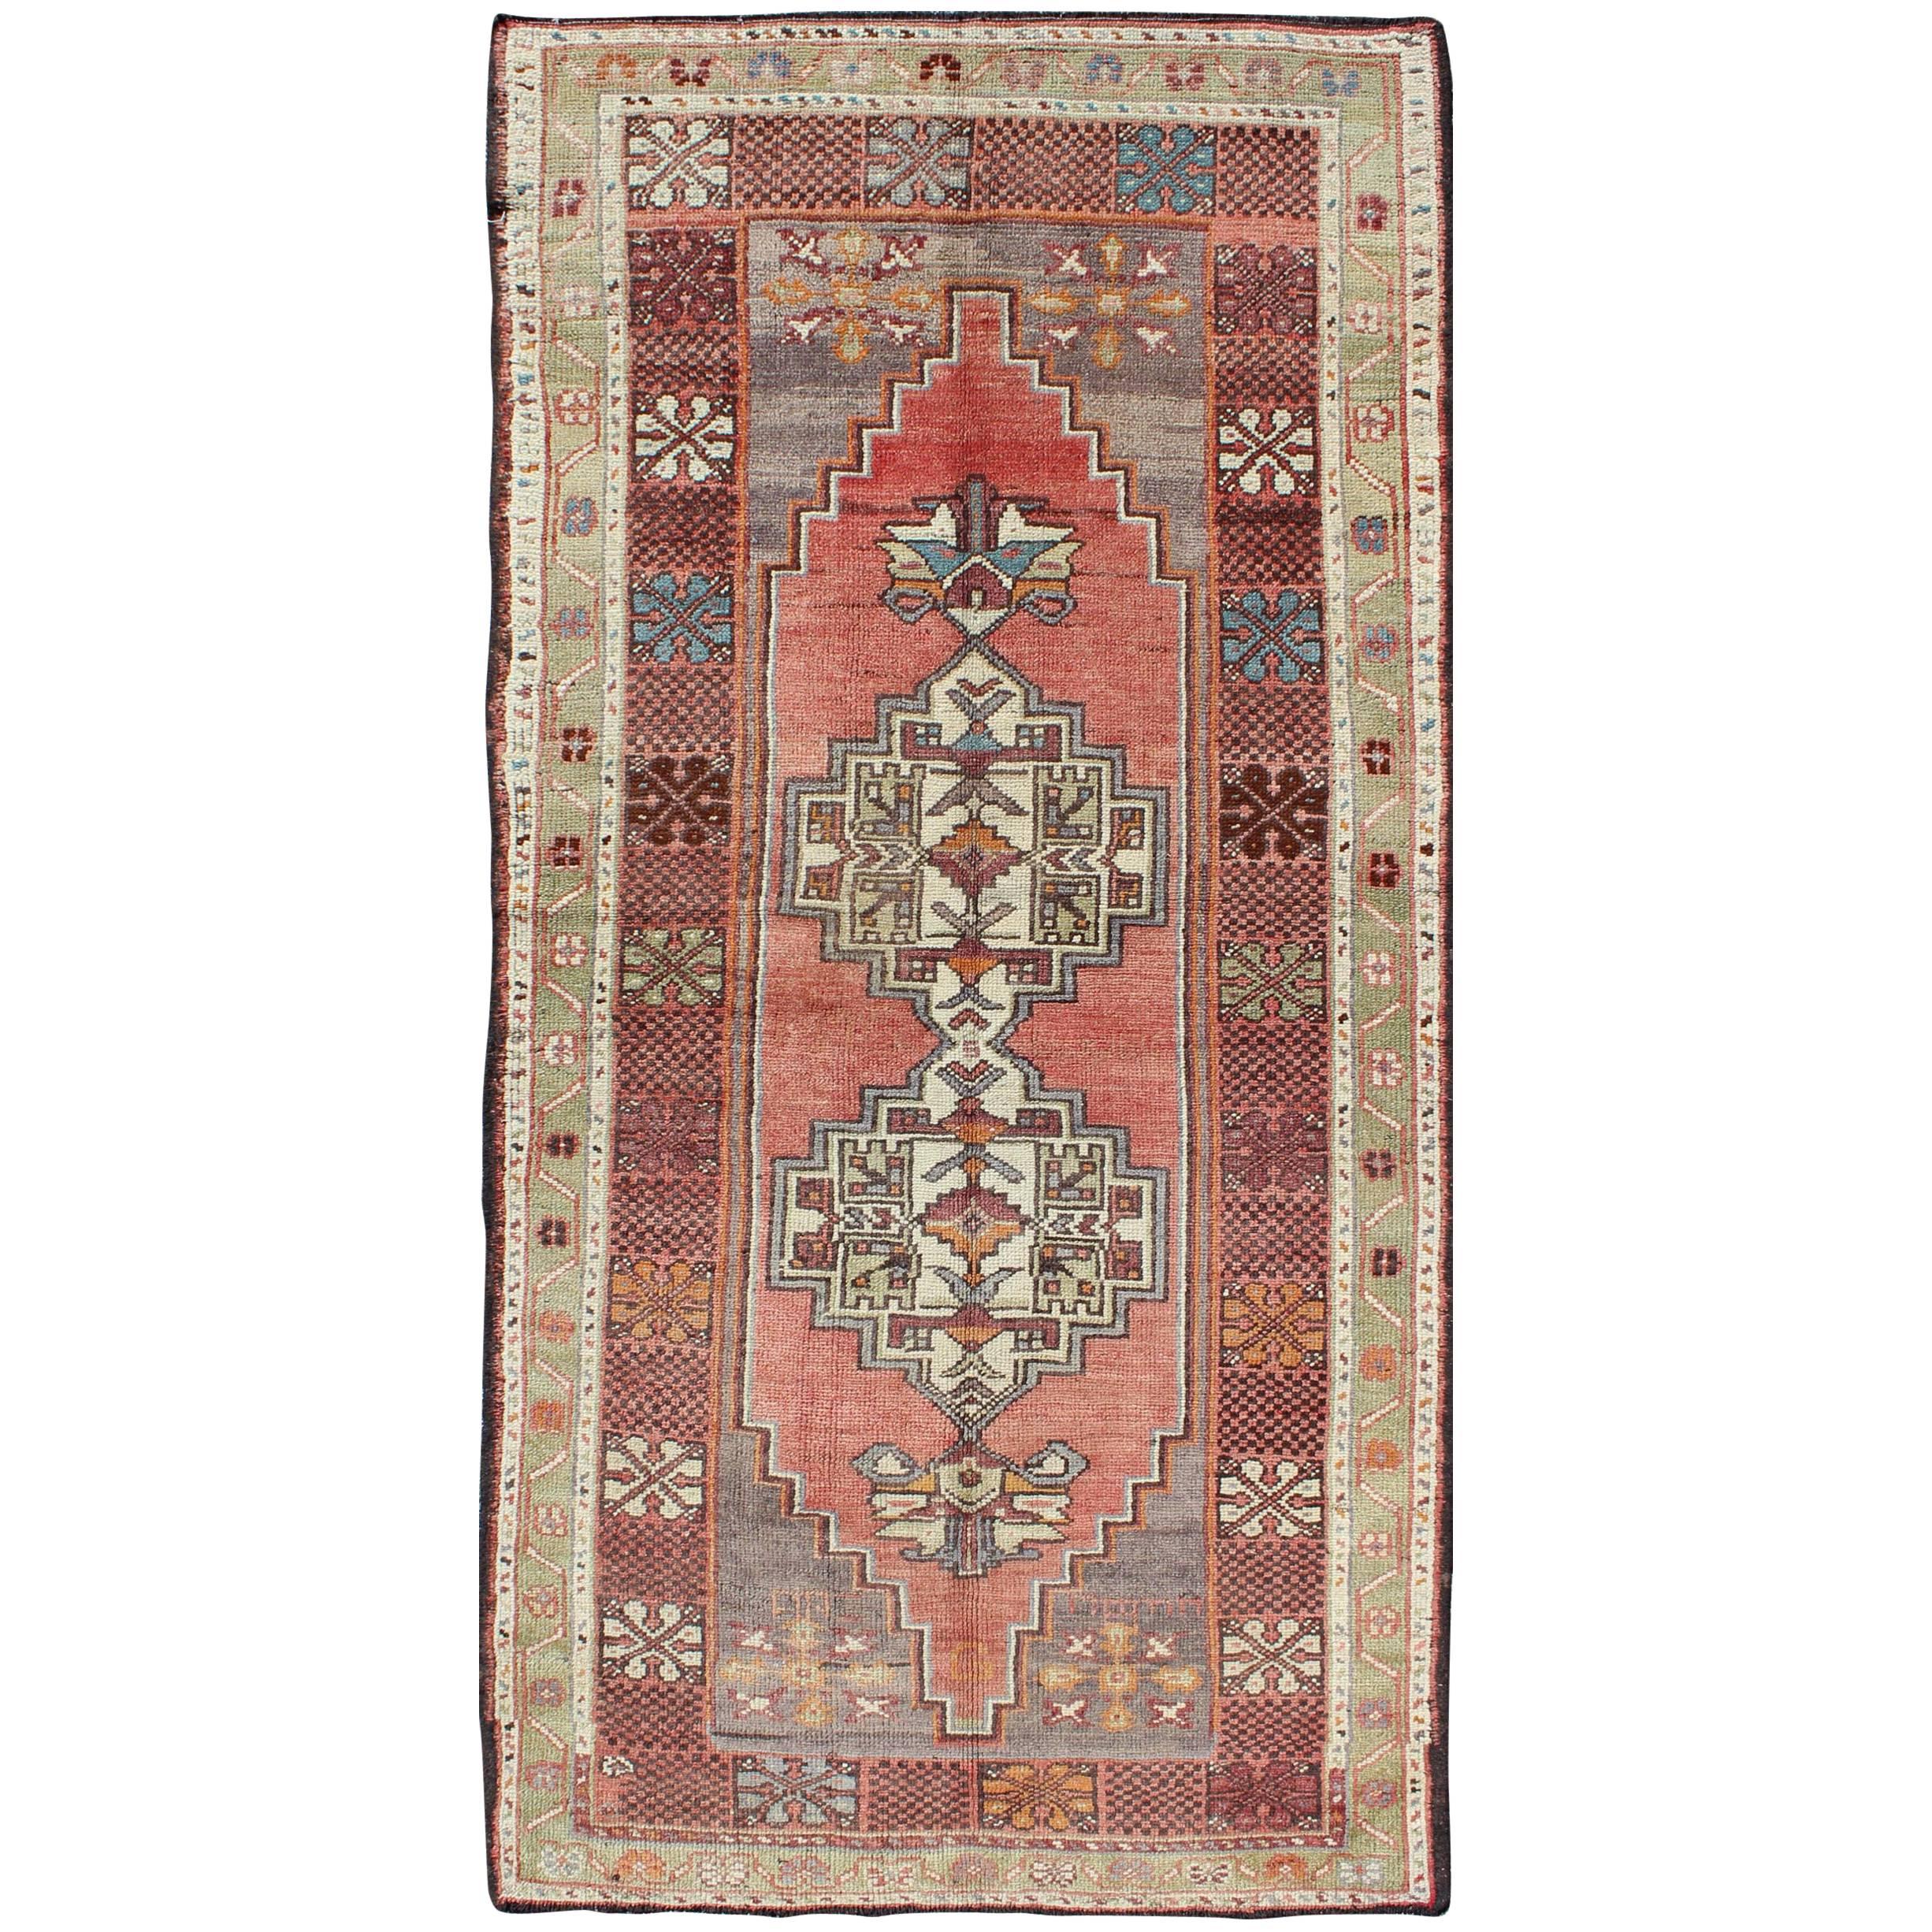 Soft Red and Green Vintage Turkish Oushak Rug with Sub-Geometric Dual Medallions